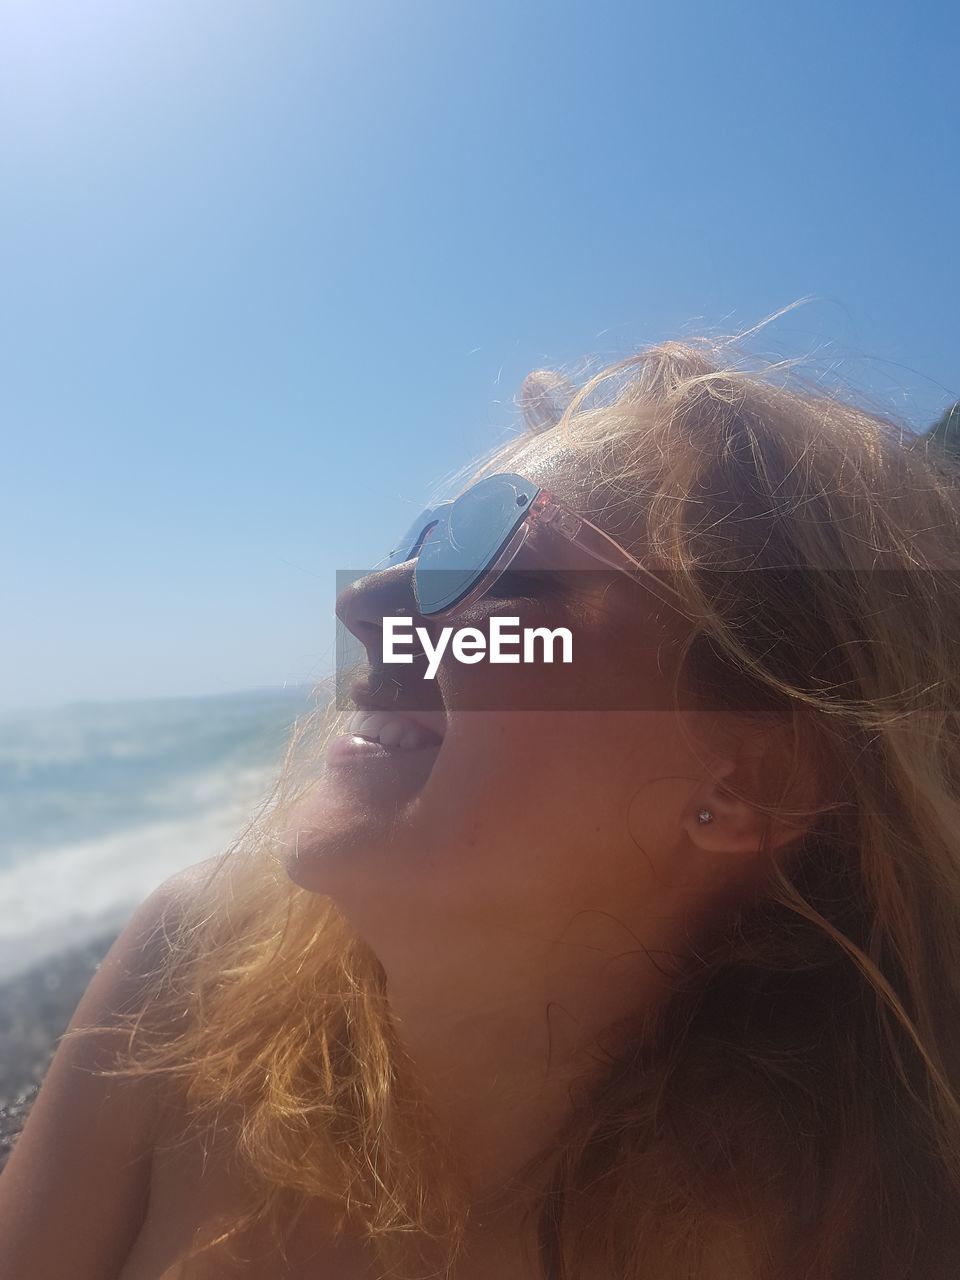 PORTRAIT OF WOMAN WEARING SUNGLASSES AGAINST CLEAR SKY